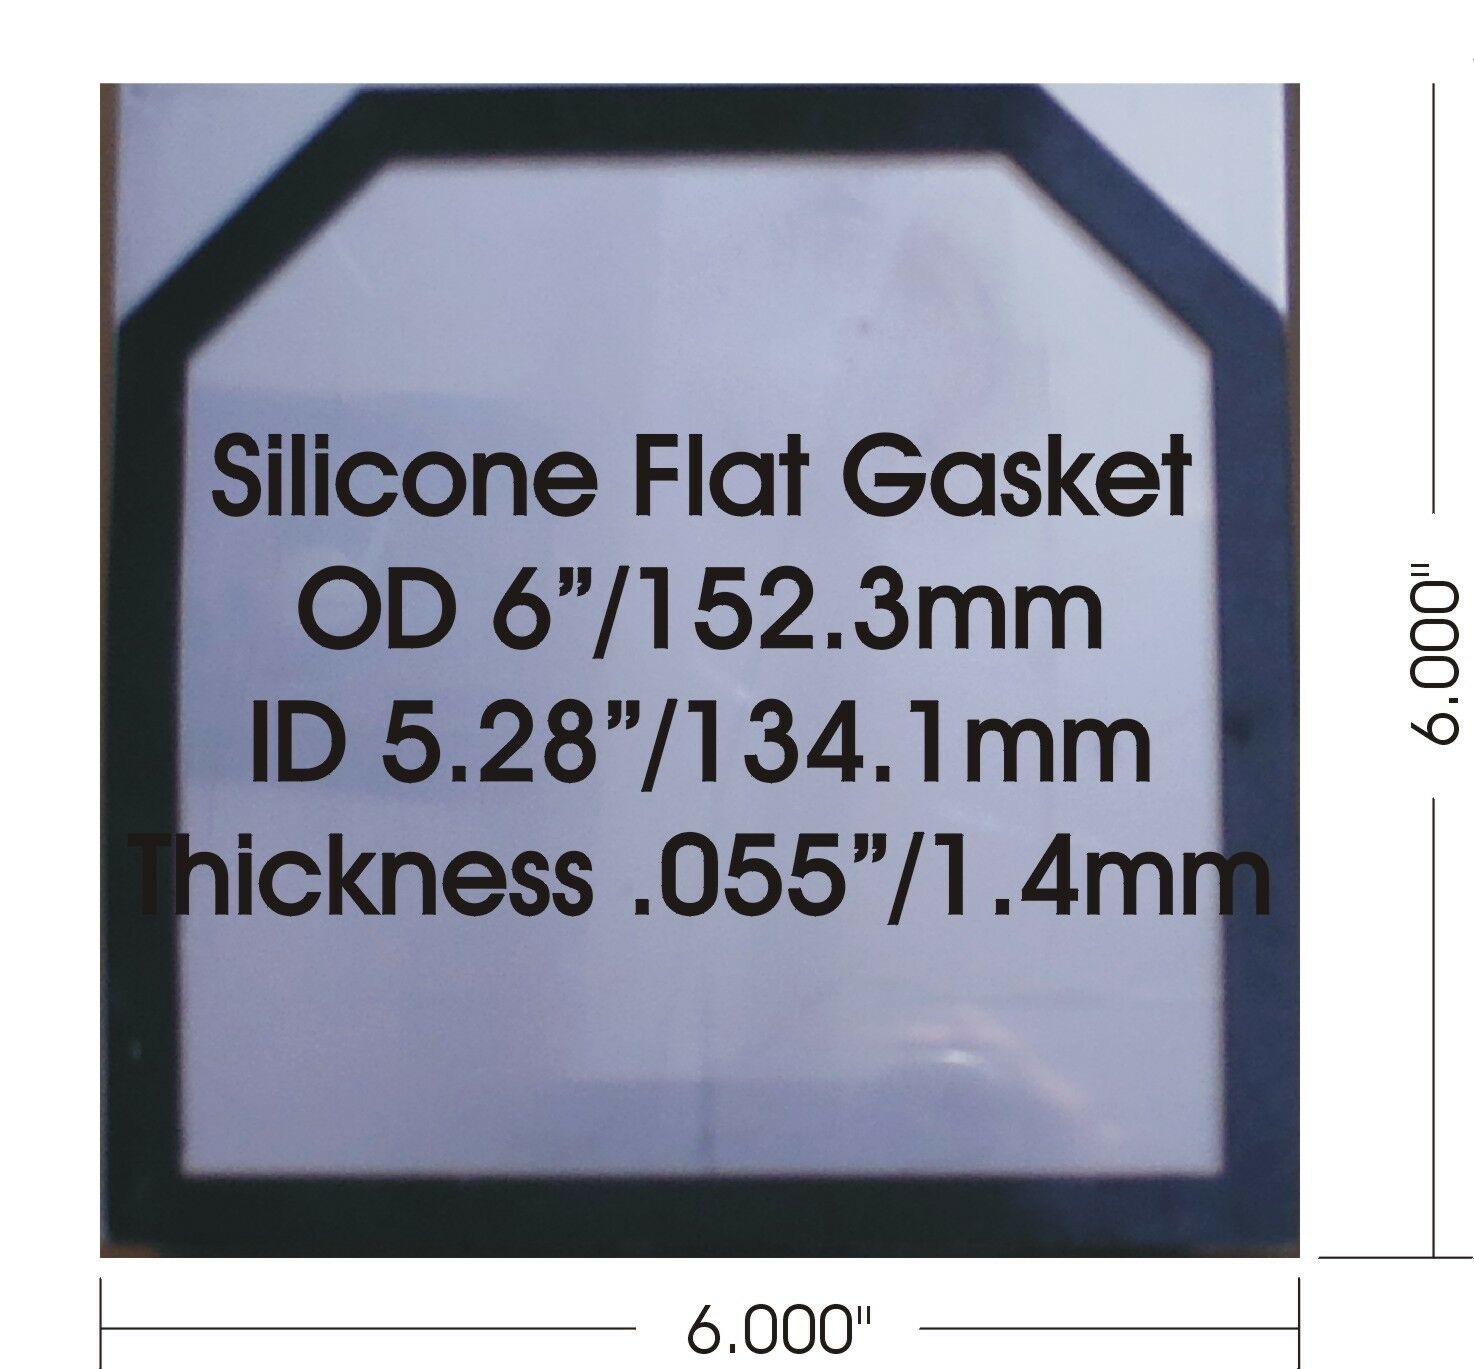 13 Pcs High Temp Flat Silicone Gasket For Hho Dry Cell Thickness =1.4mm/0.055"